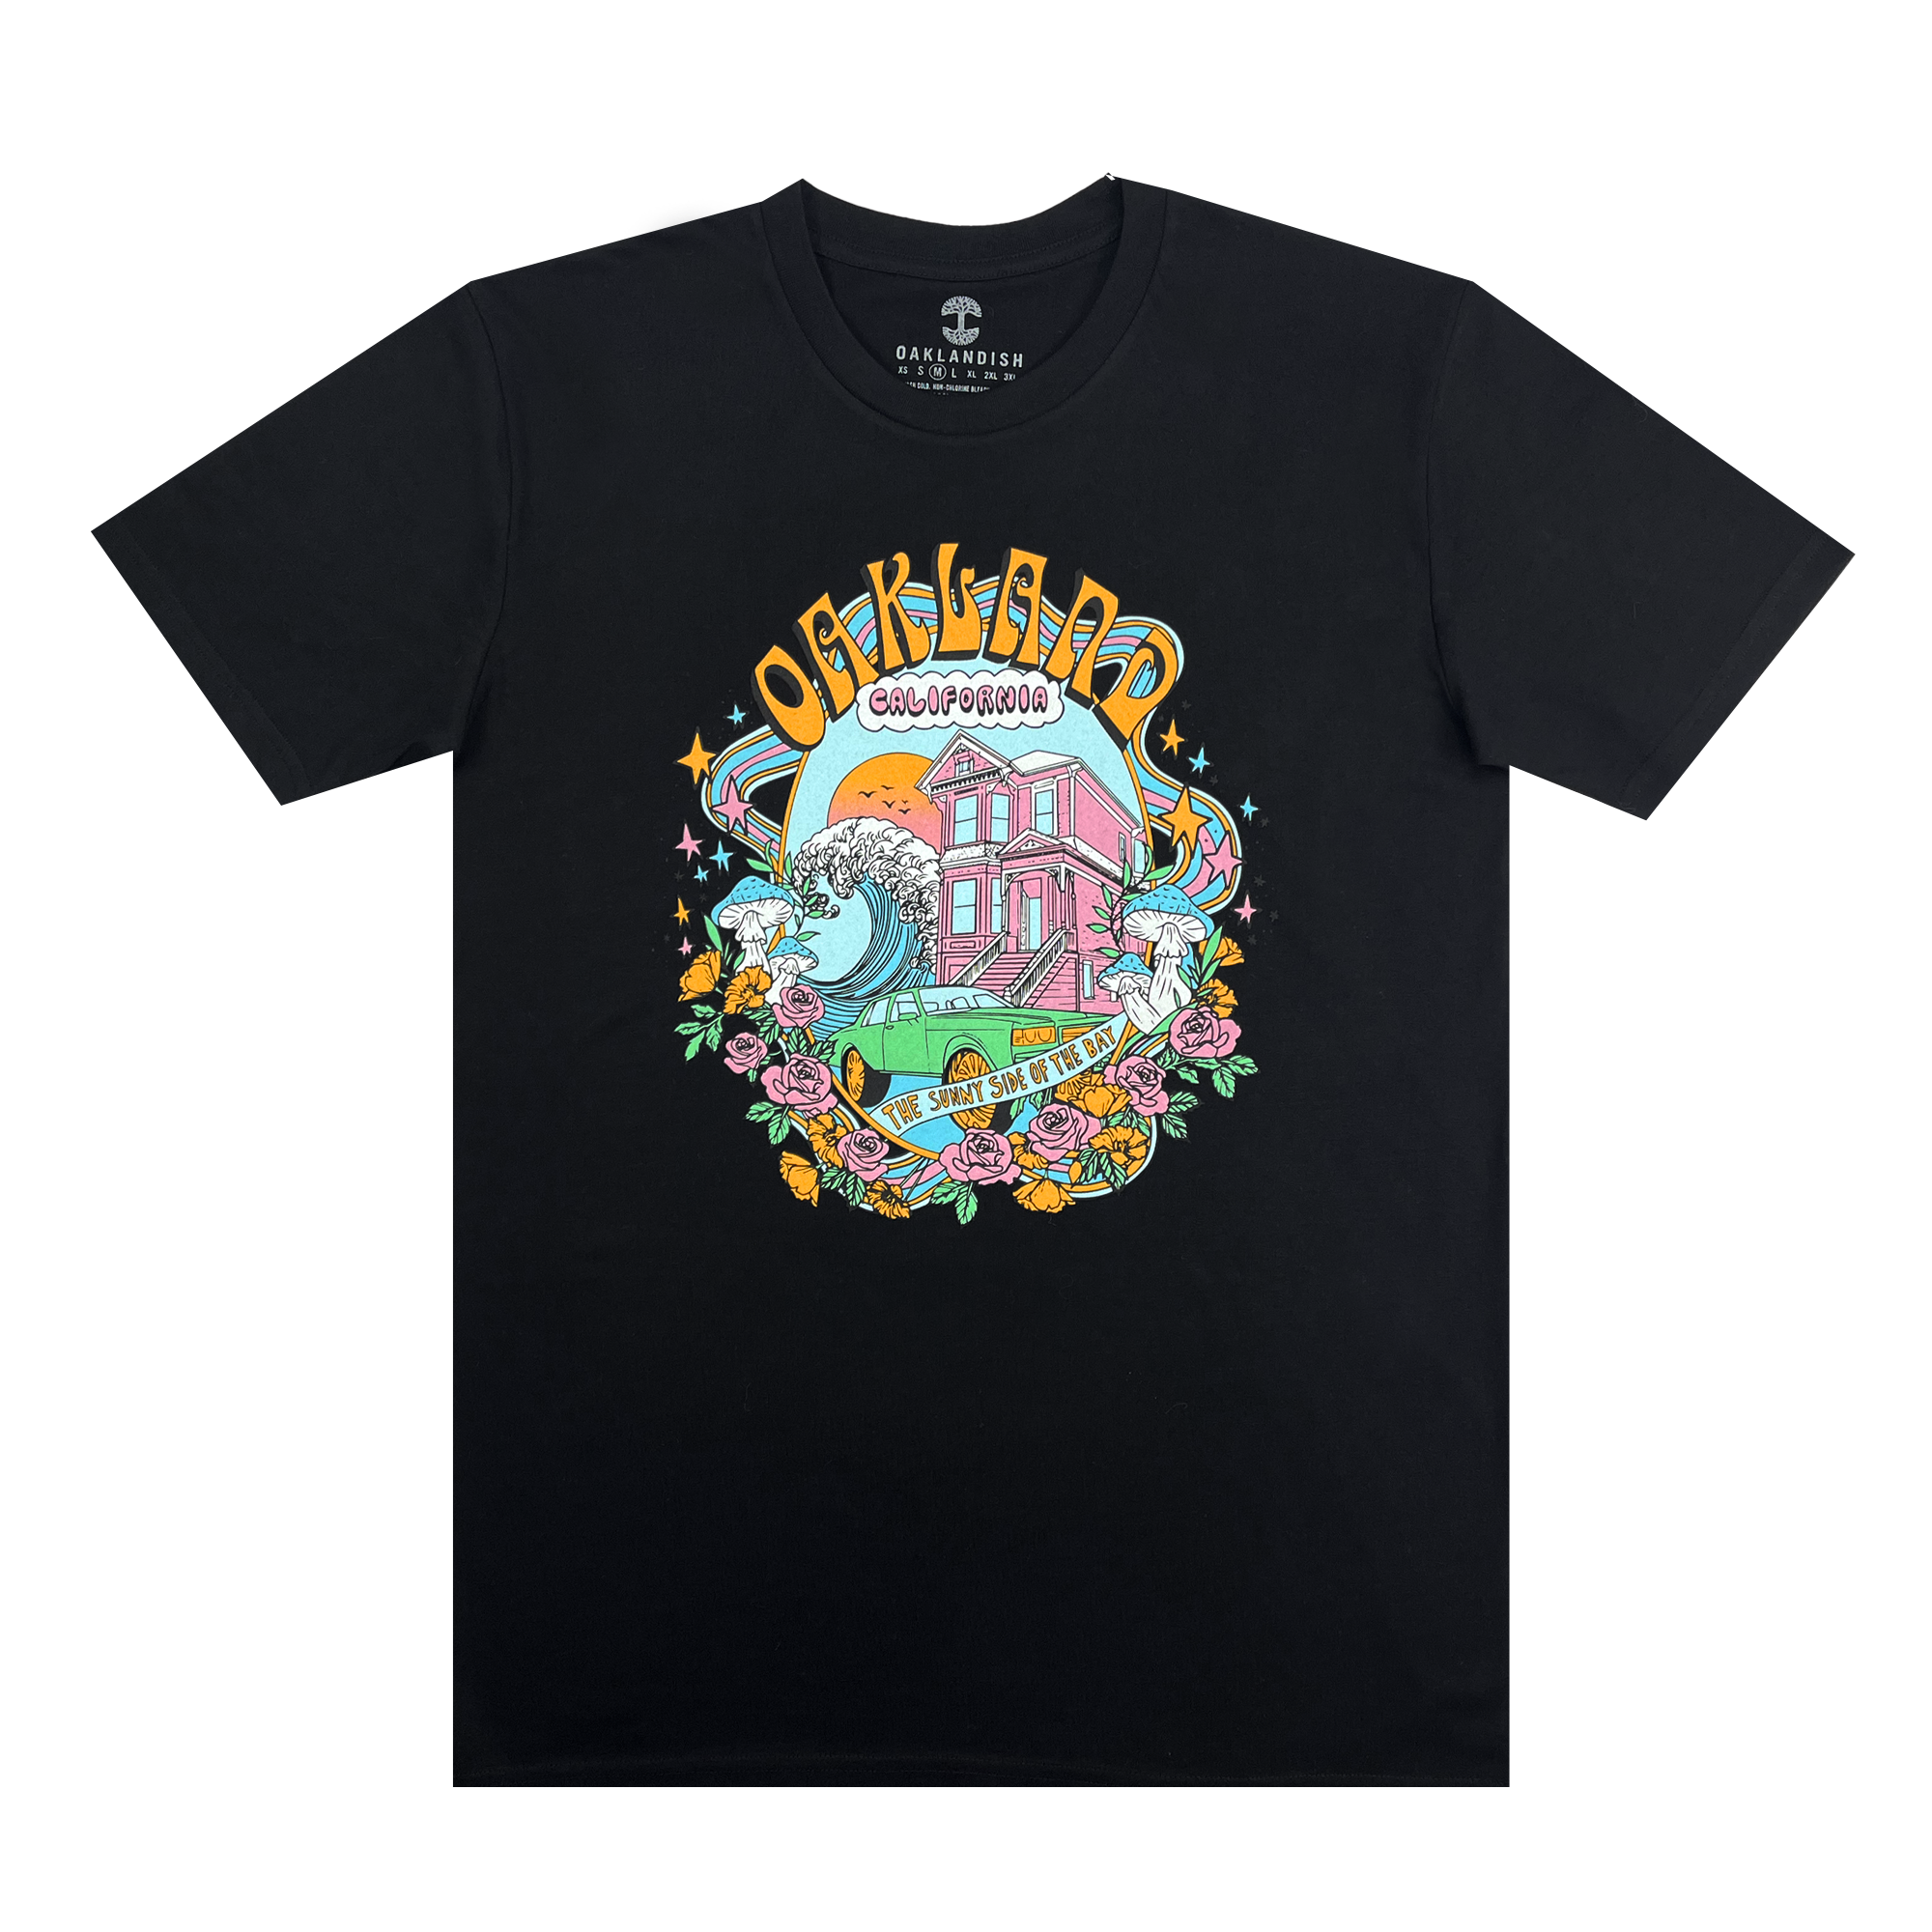 Front view of black cotton t-shirt with Oakland dream design.